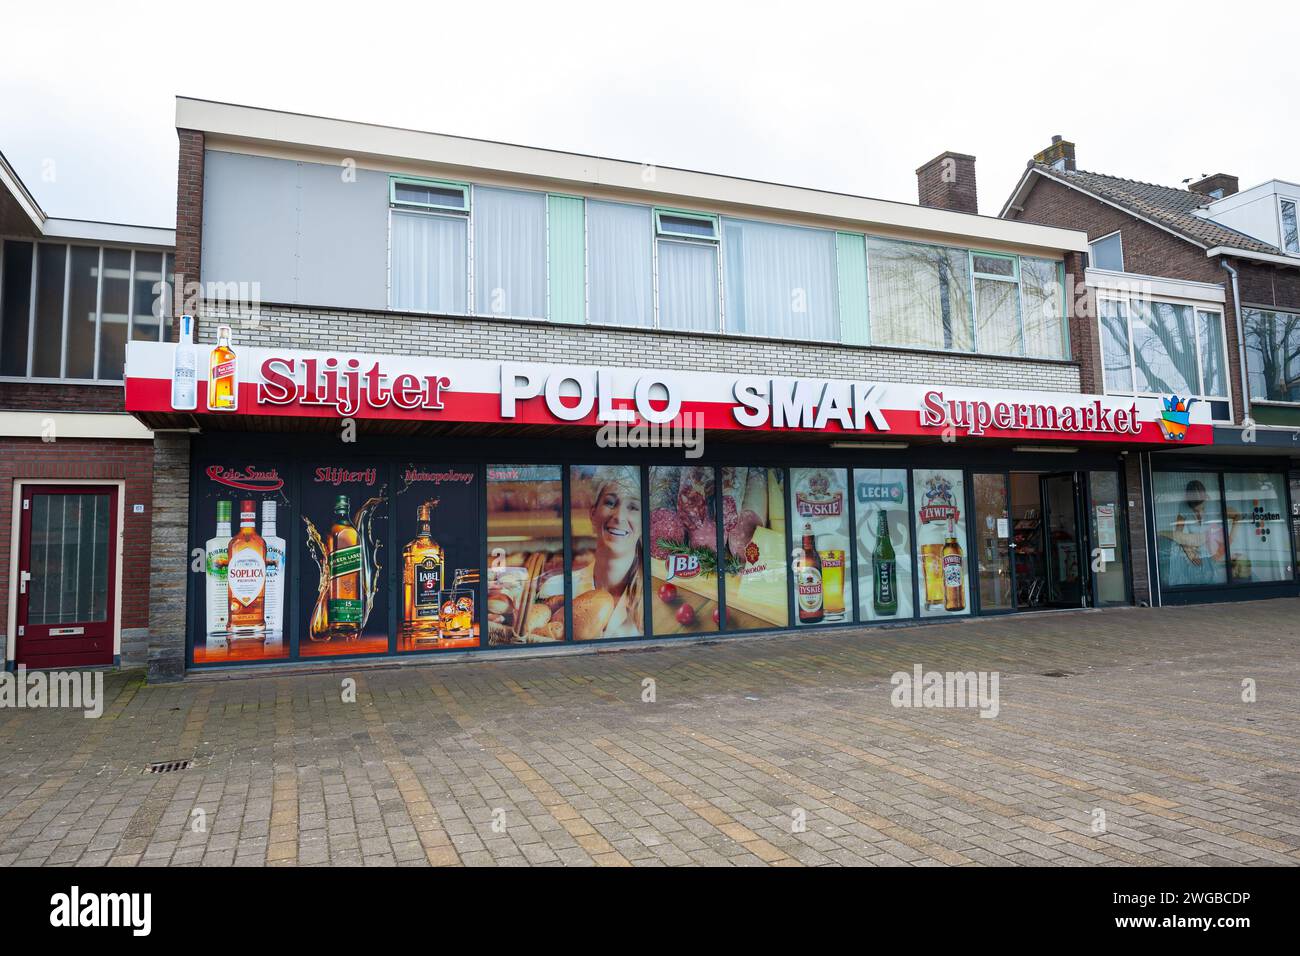 Polish supermarket 'Polo Smak' located in the center of the town of Waddinxveen, The Netherlands. Stock Photo